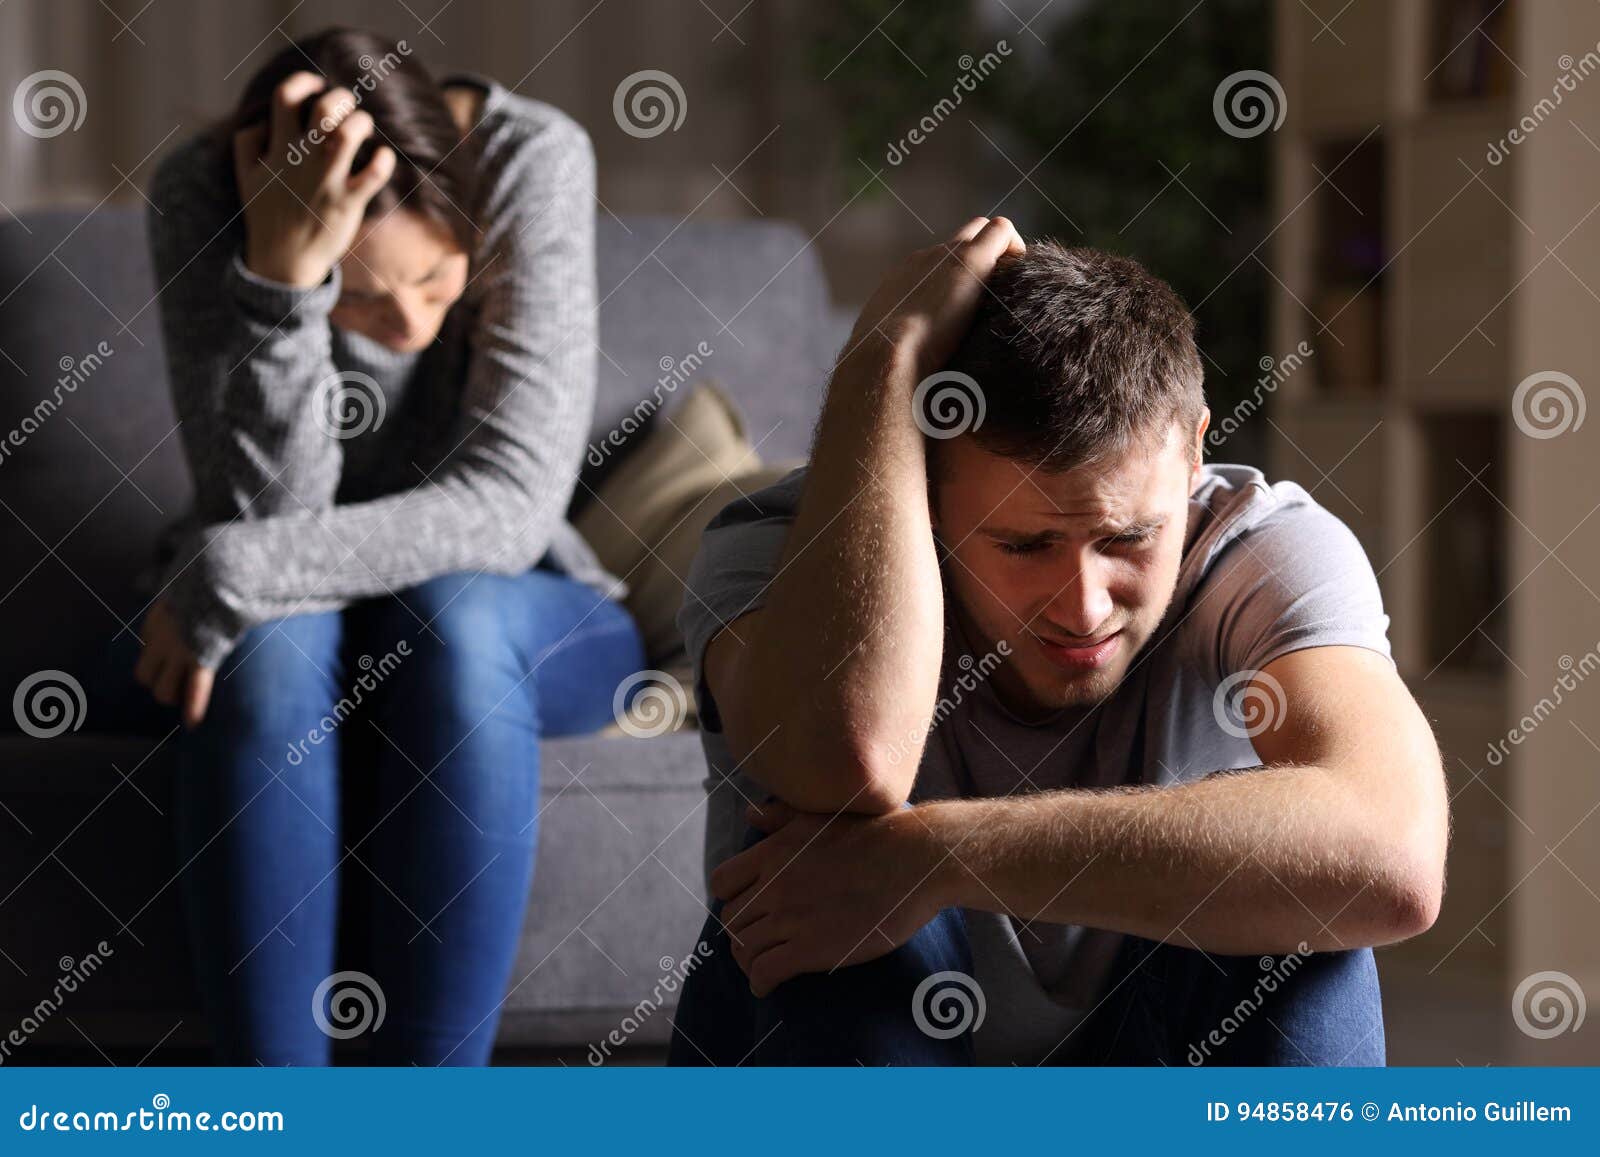 sad couple after breaking up